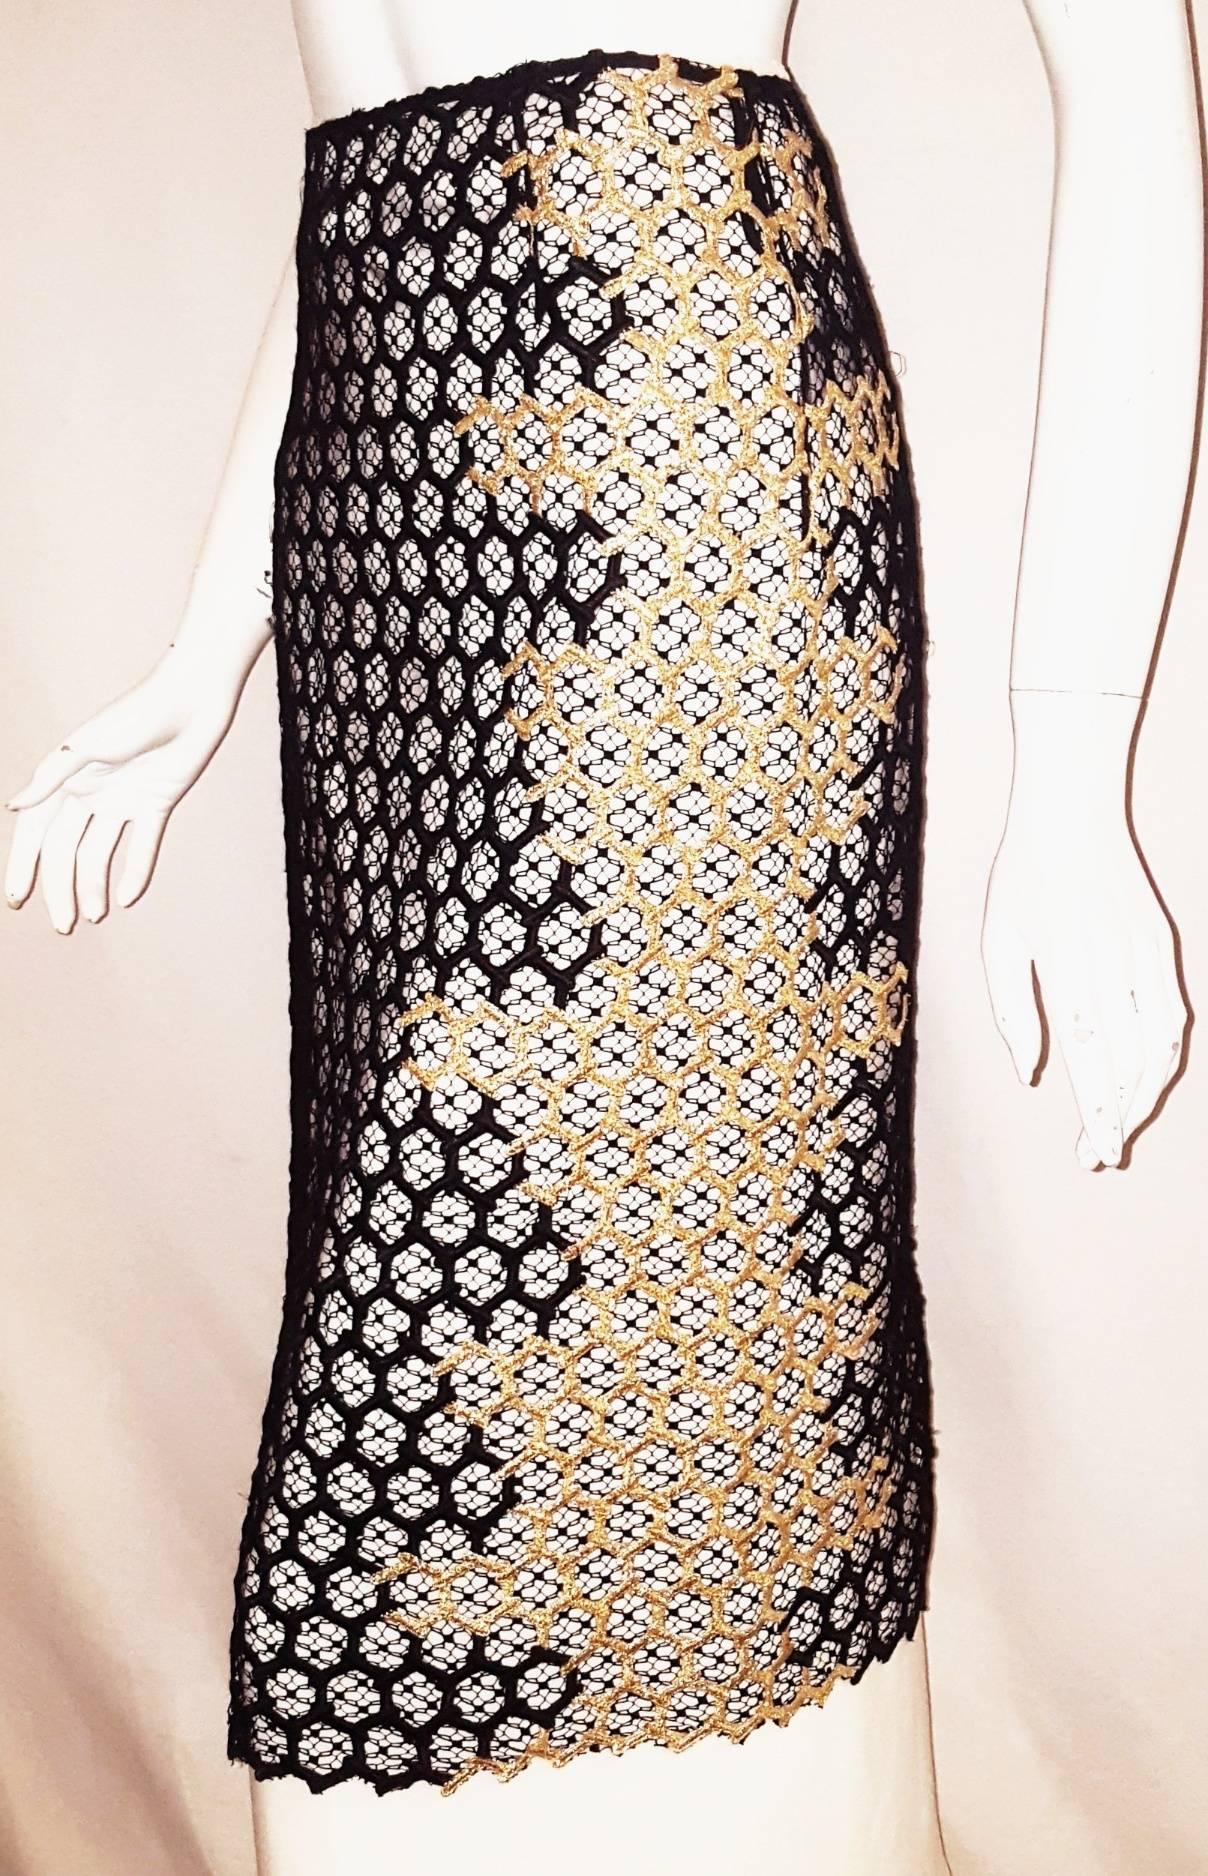 Alexander McQueen Black & Gold Tone Honeycomb Macrame Skirt 46 EU In Excellent Condition For Sale In Palm Beach, FL